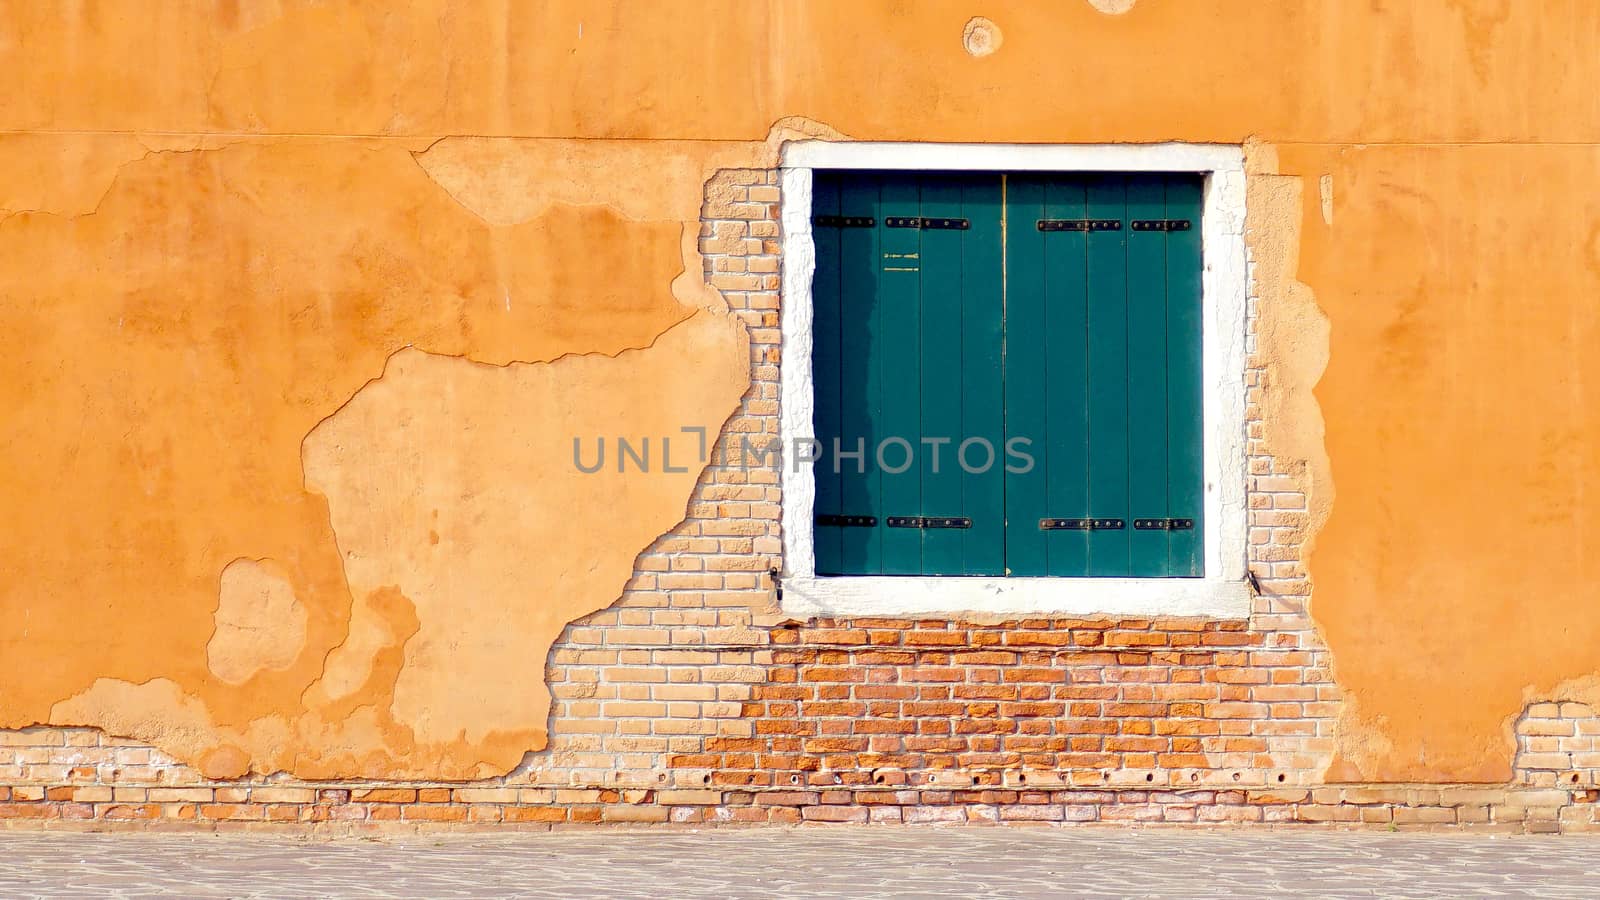 green Window on yellow and brick wall building architecture, Venice, Italy